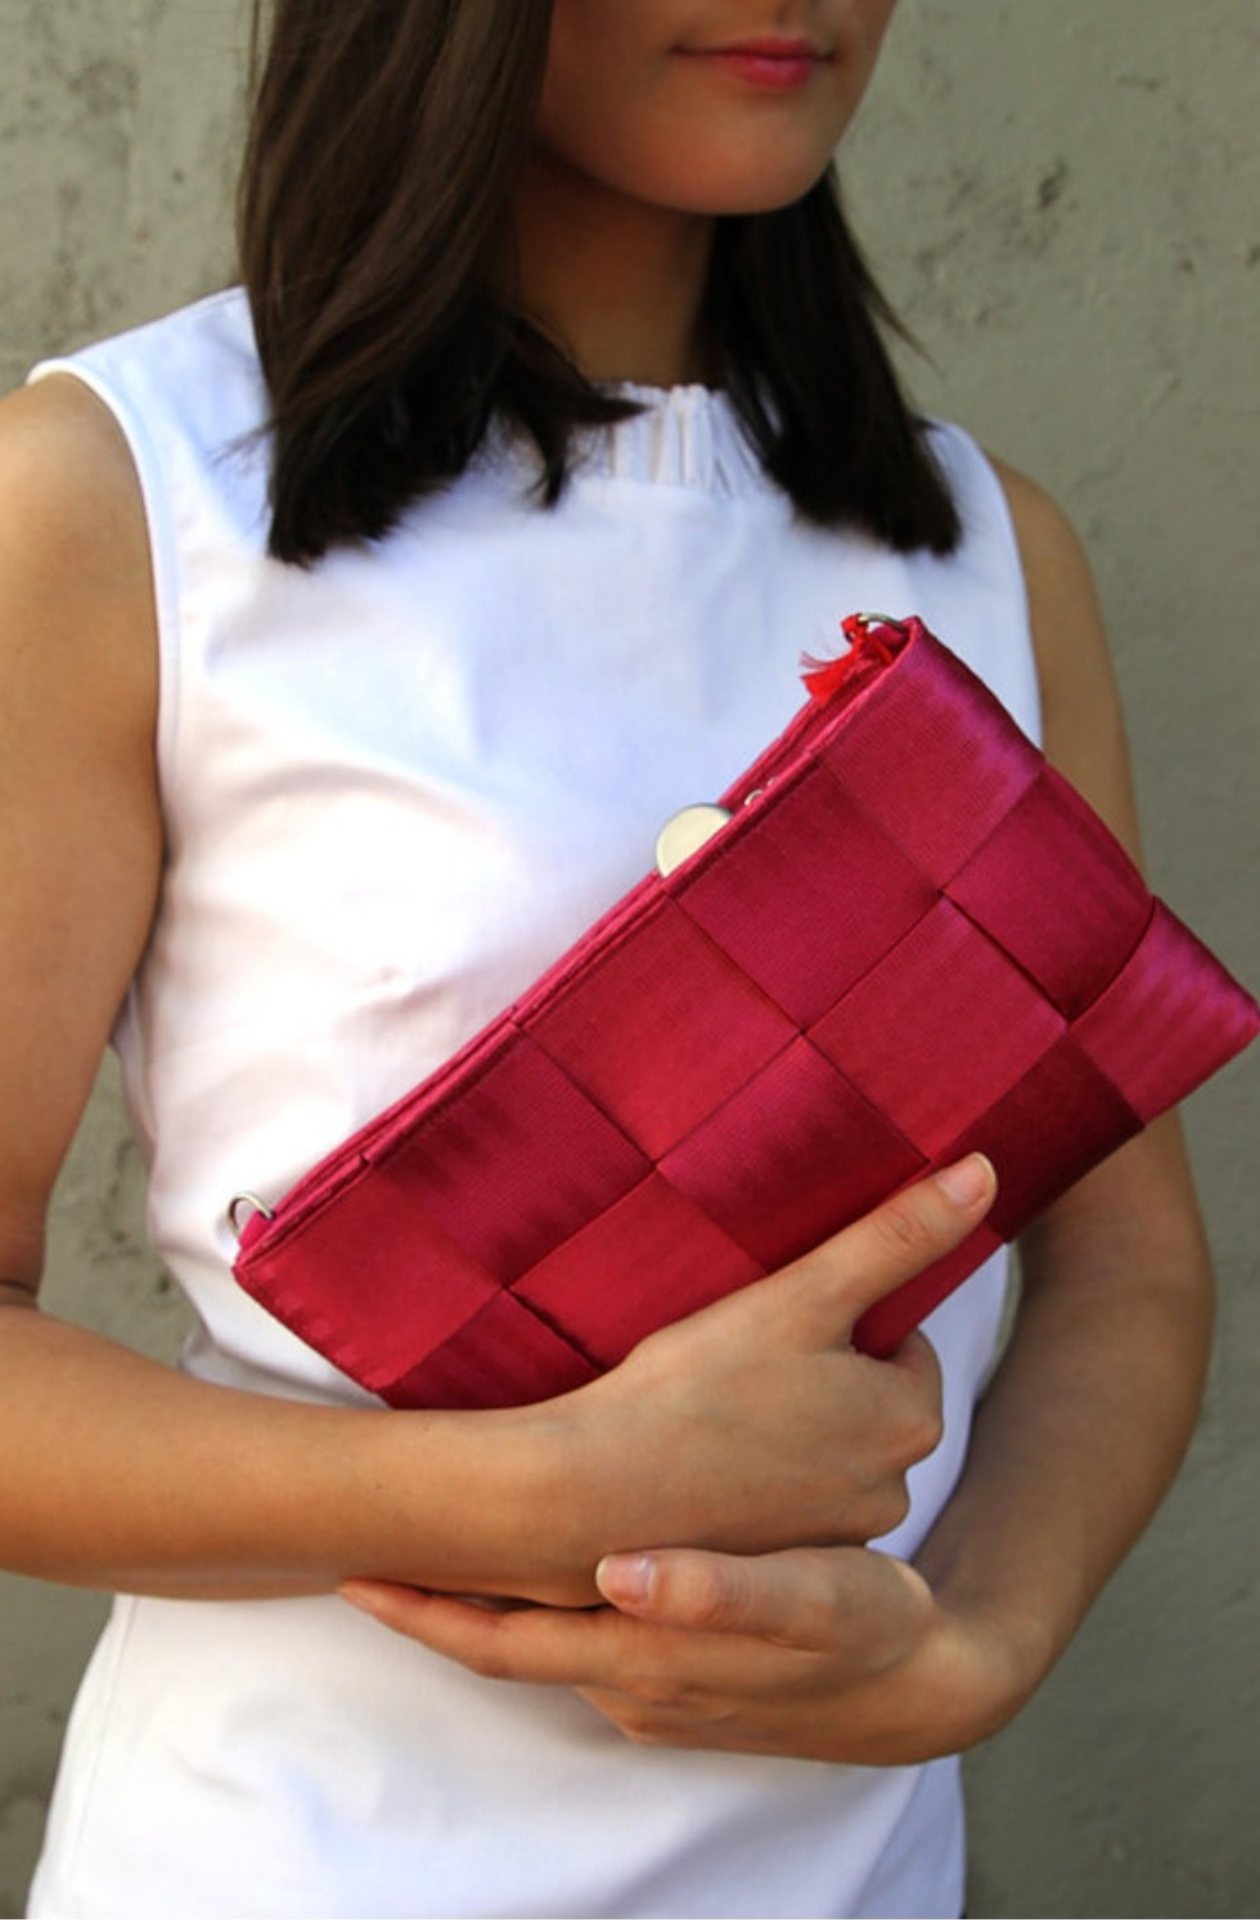 Upcycled car seat belt bag in Berry Crush. A warm pink toned red criss cross pattern with seatbelt texture, and a long over the shoulder style strap.